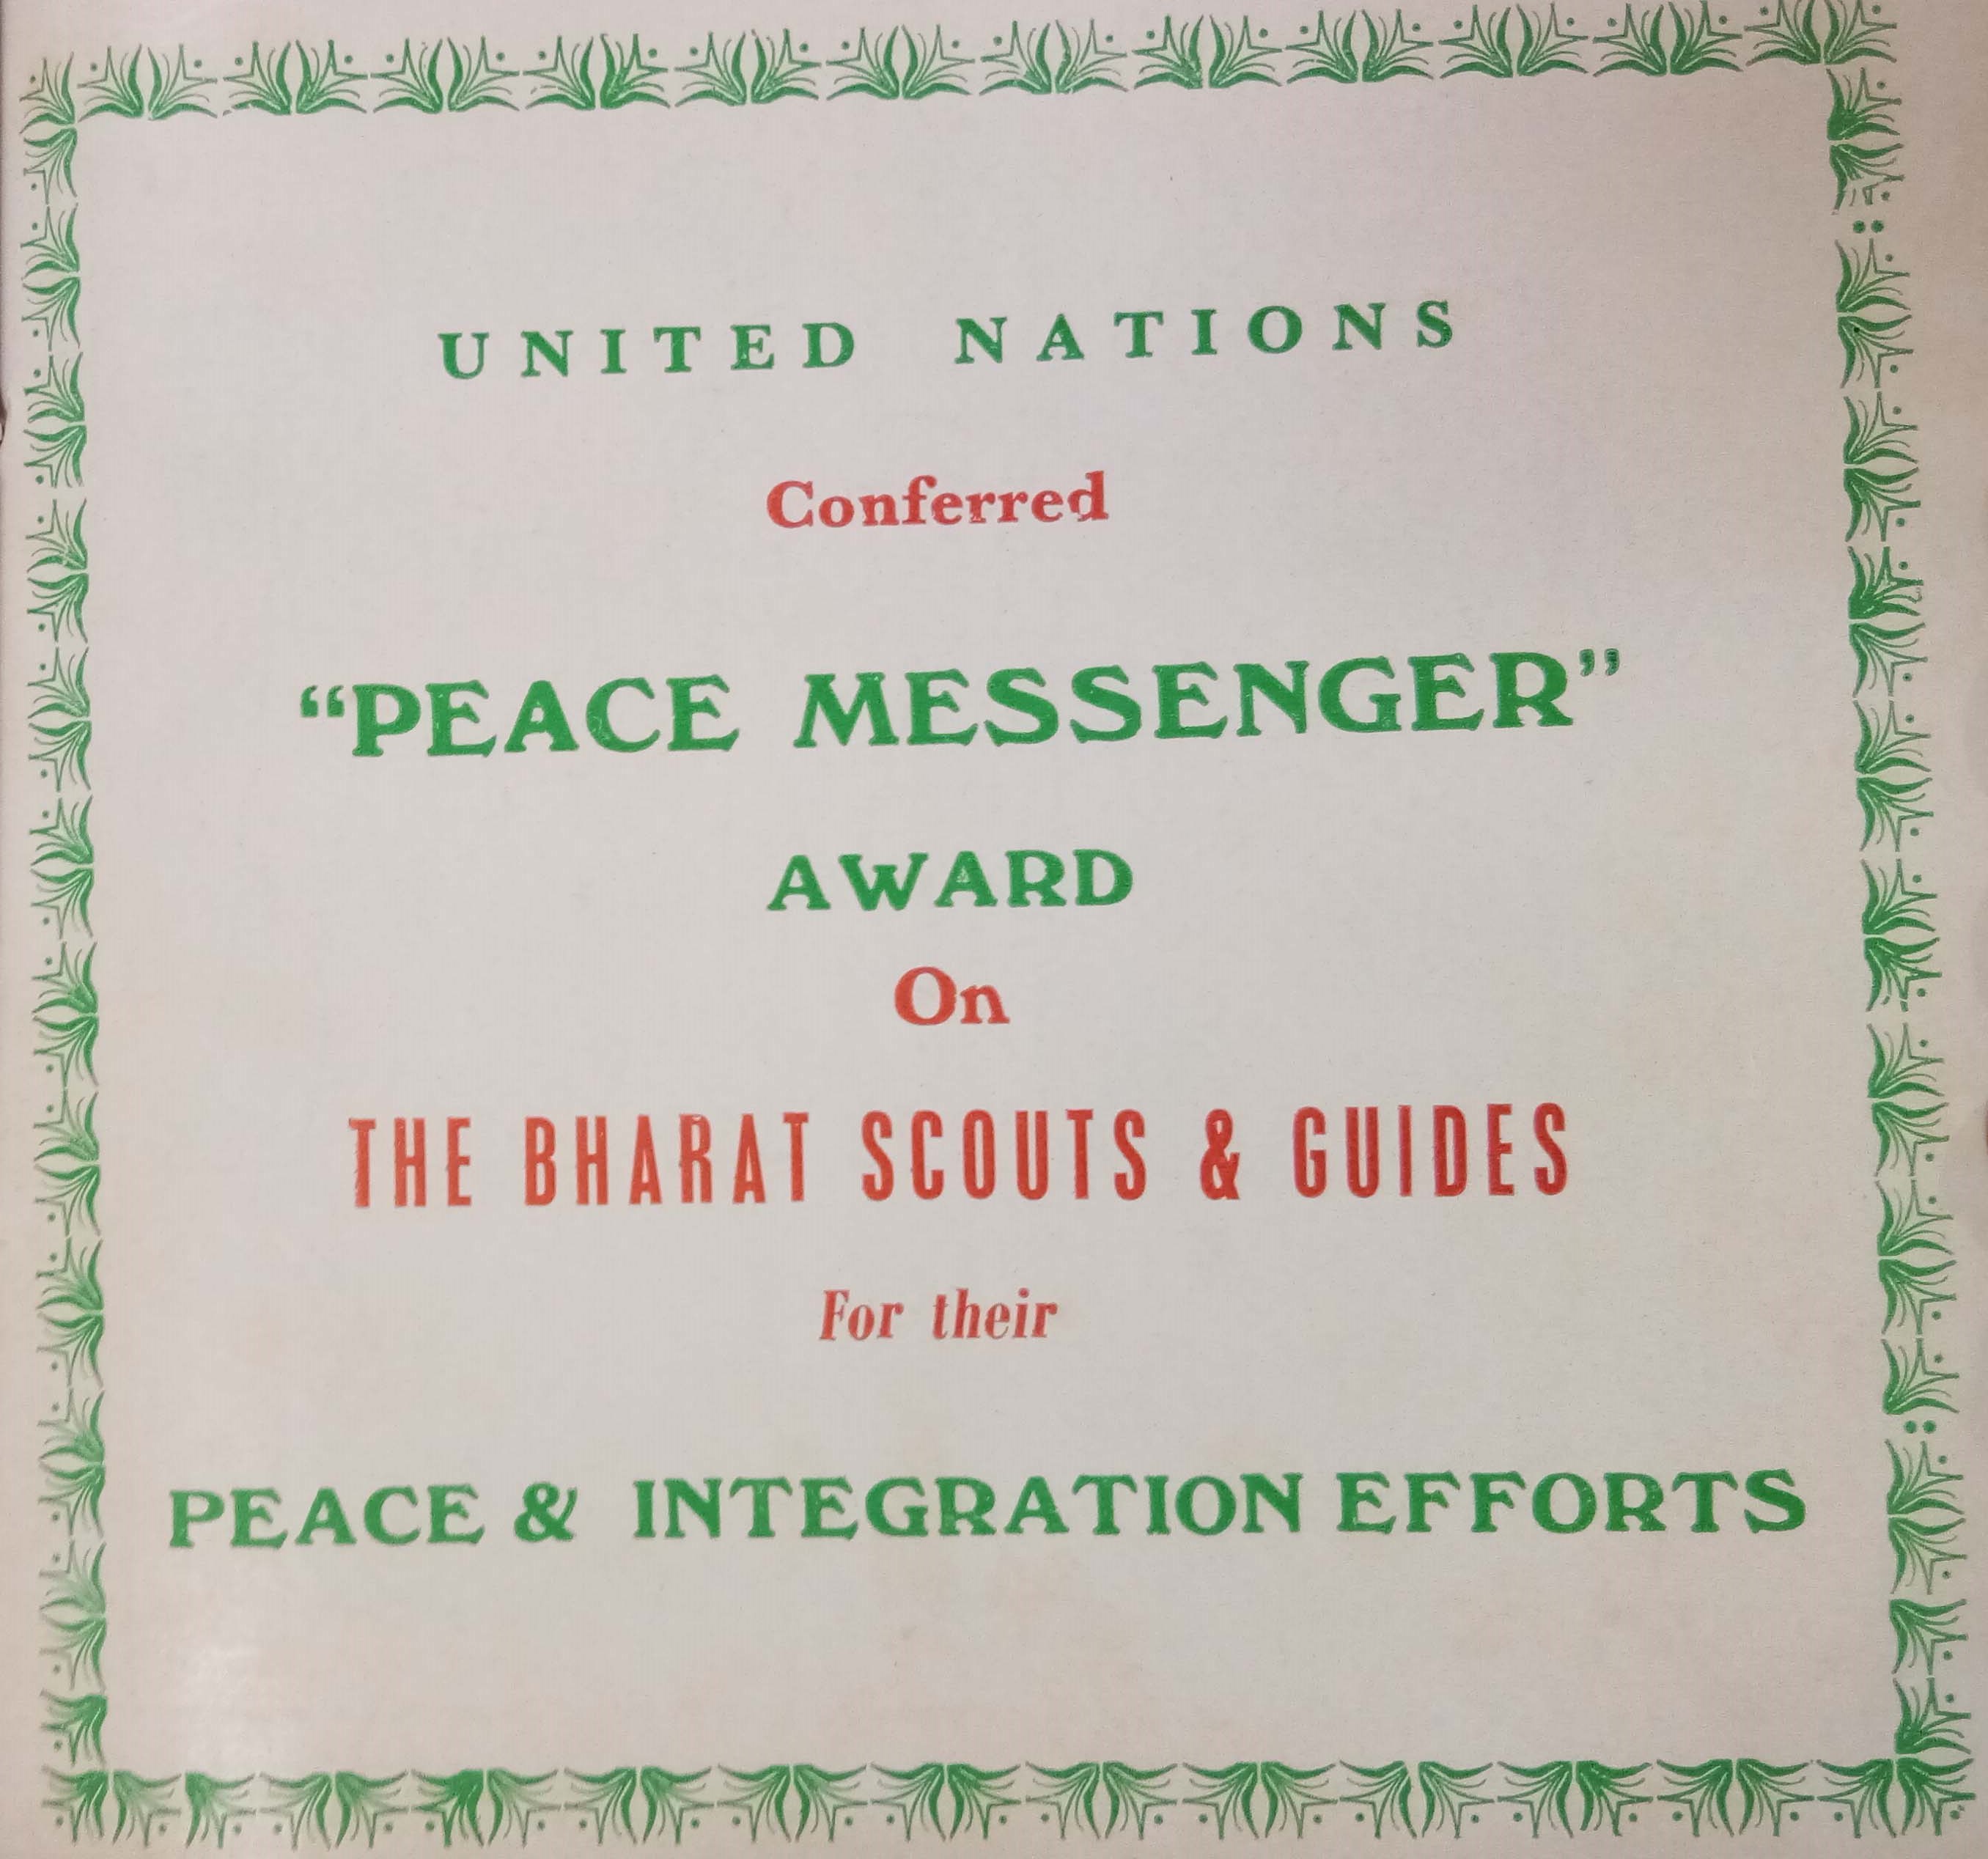 Peace Messenger Award given by UN General Assembly